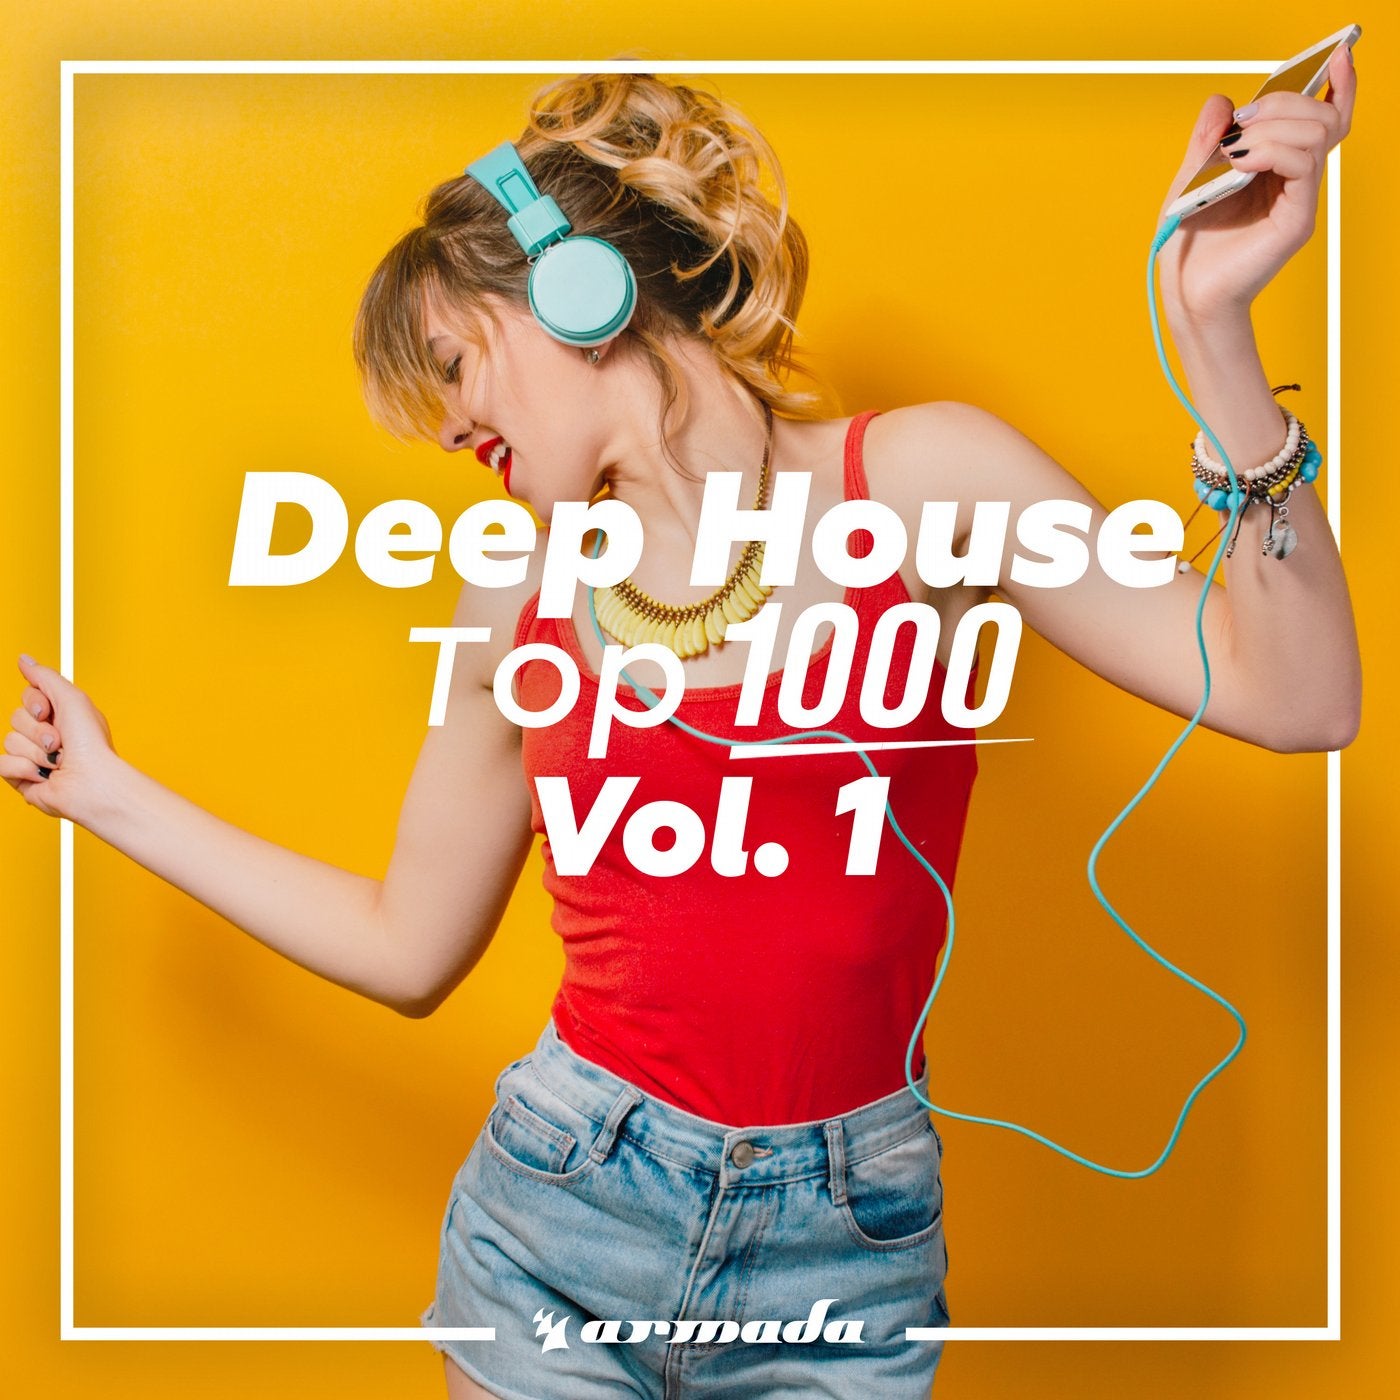 Deep House Top 1000, Vol. 1 - Armada Music - Extended Versions